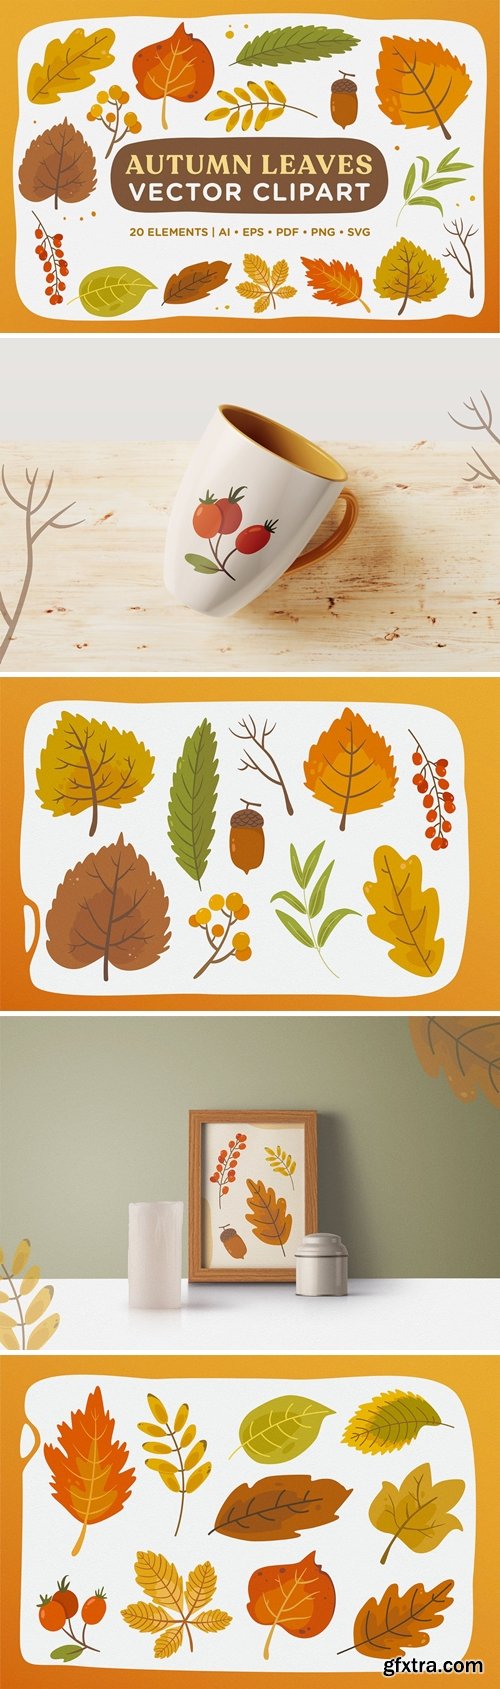 Autumn Leaves Vector Clipart Pack